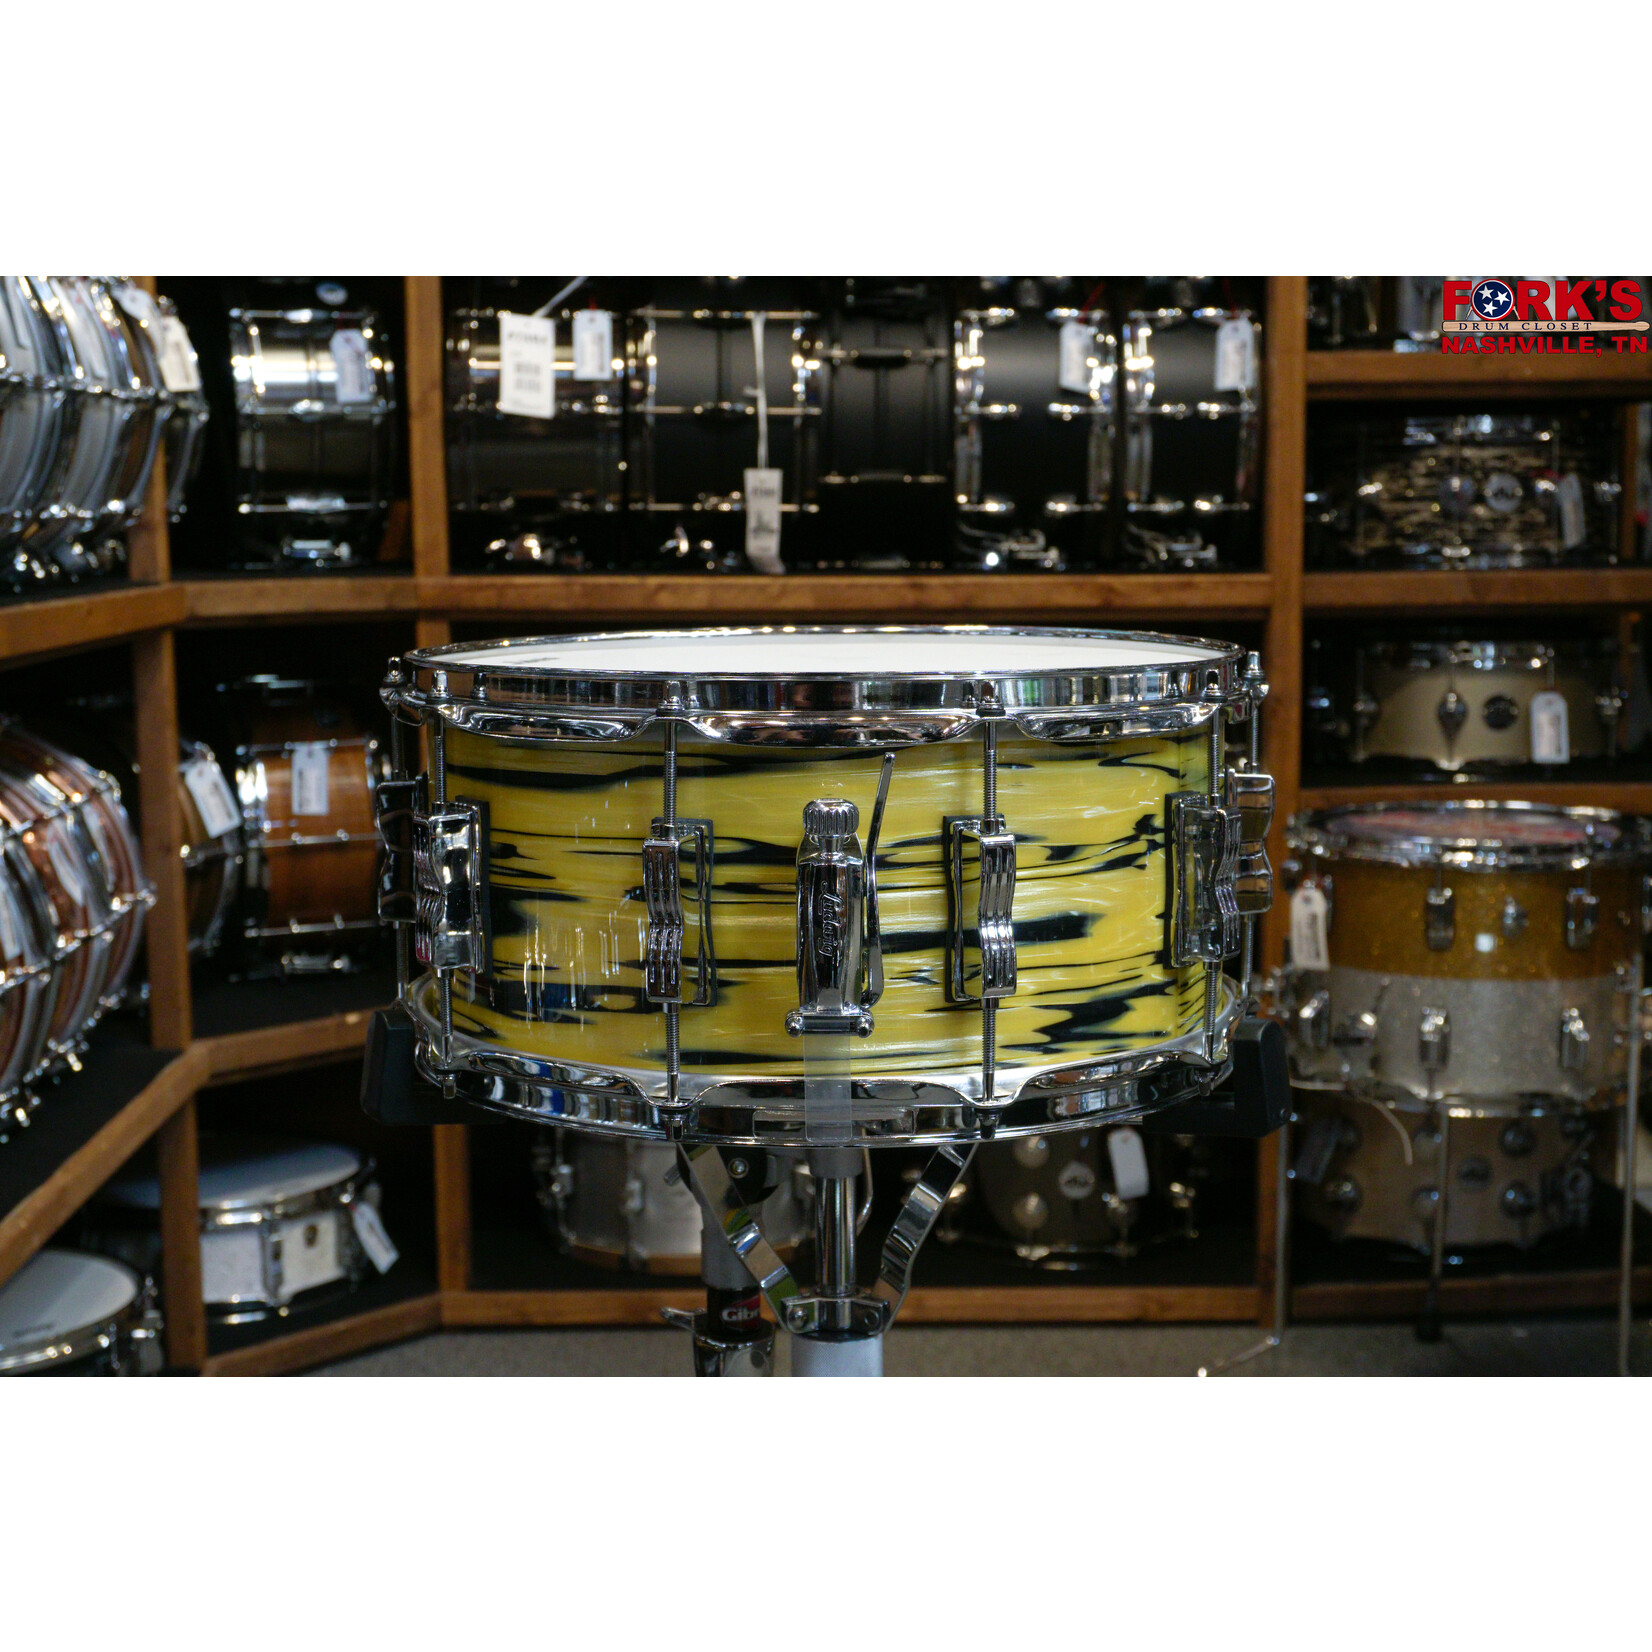 Ludwig Ludwig Classic Maple 6.5x14 Snare Drum - "Lemon Oyster"